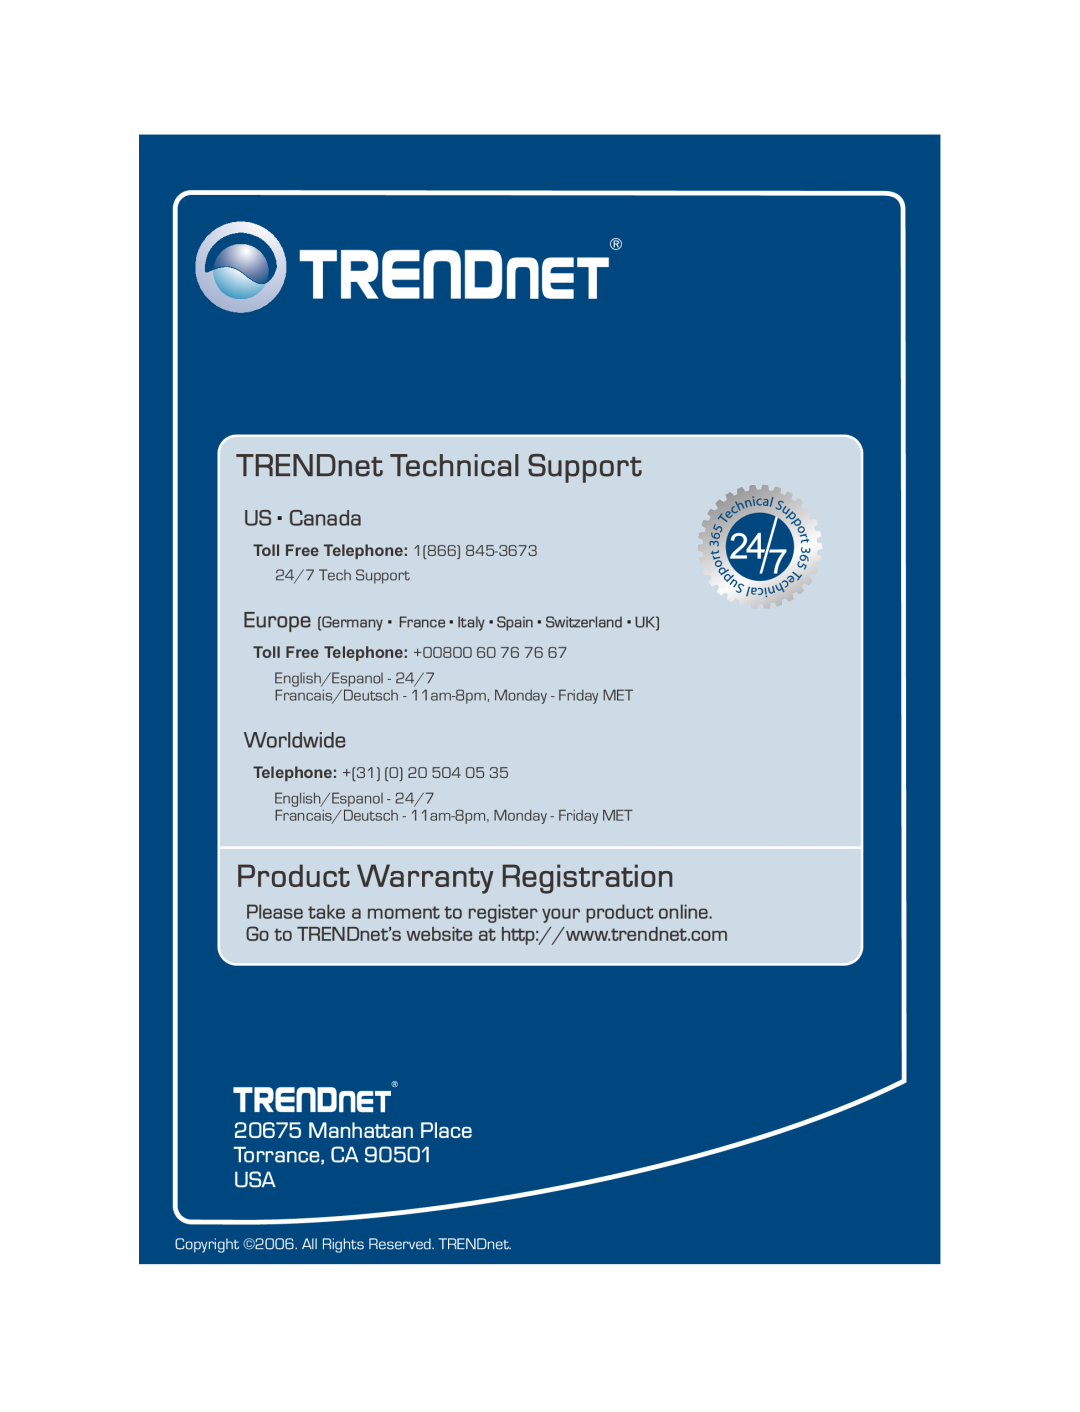 TRENDnet S5Pplus TRENDnet Technical Support, Product Warranty Registration, US . Canada, Worldwide, Toll Free Telephone 